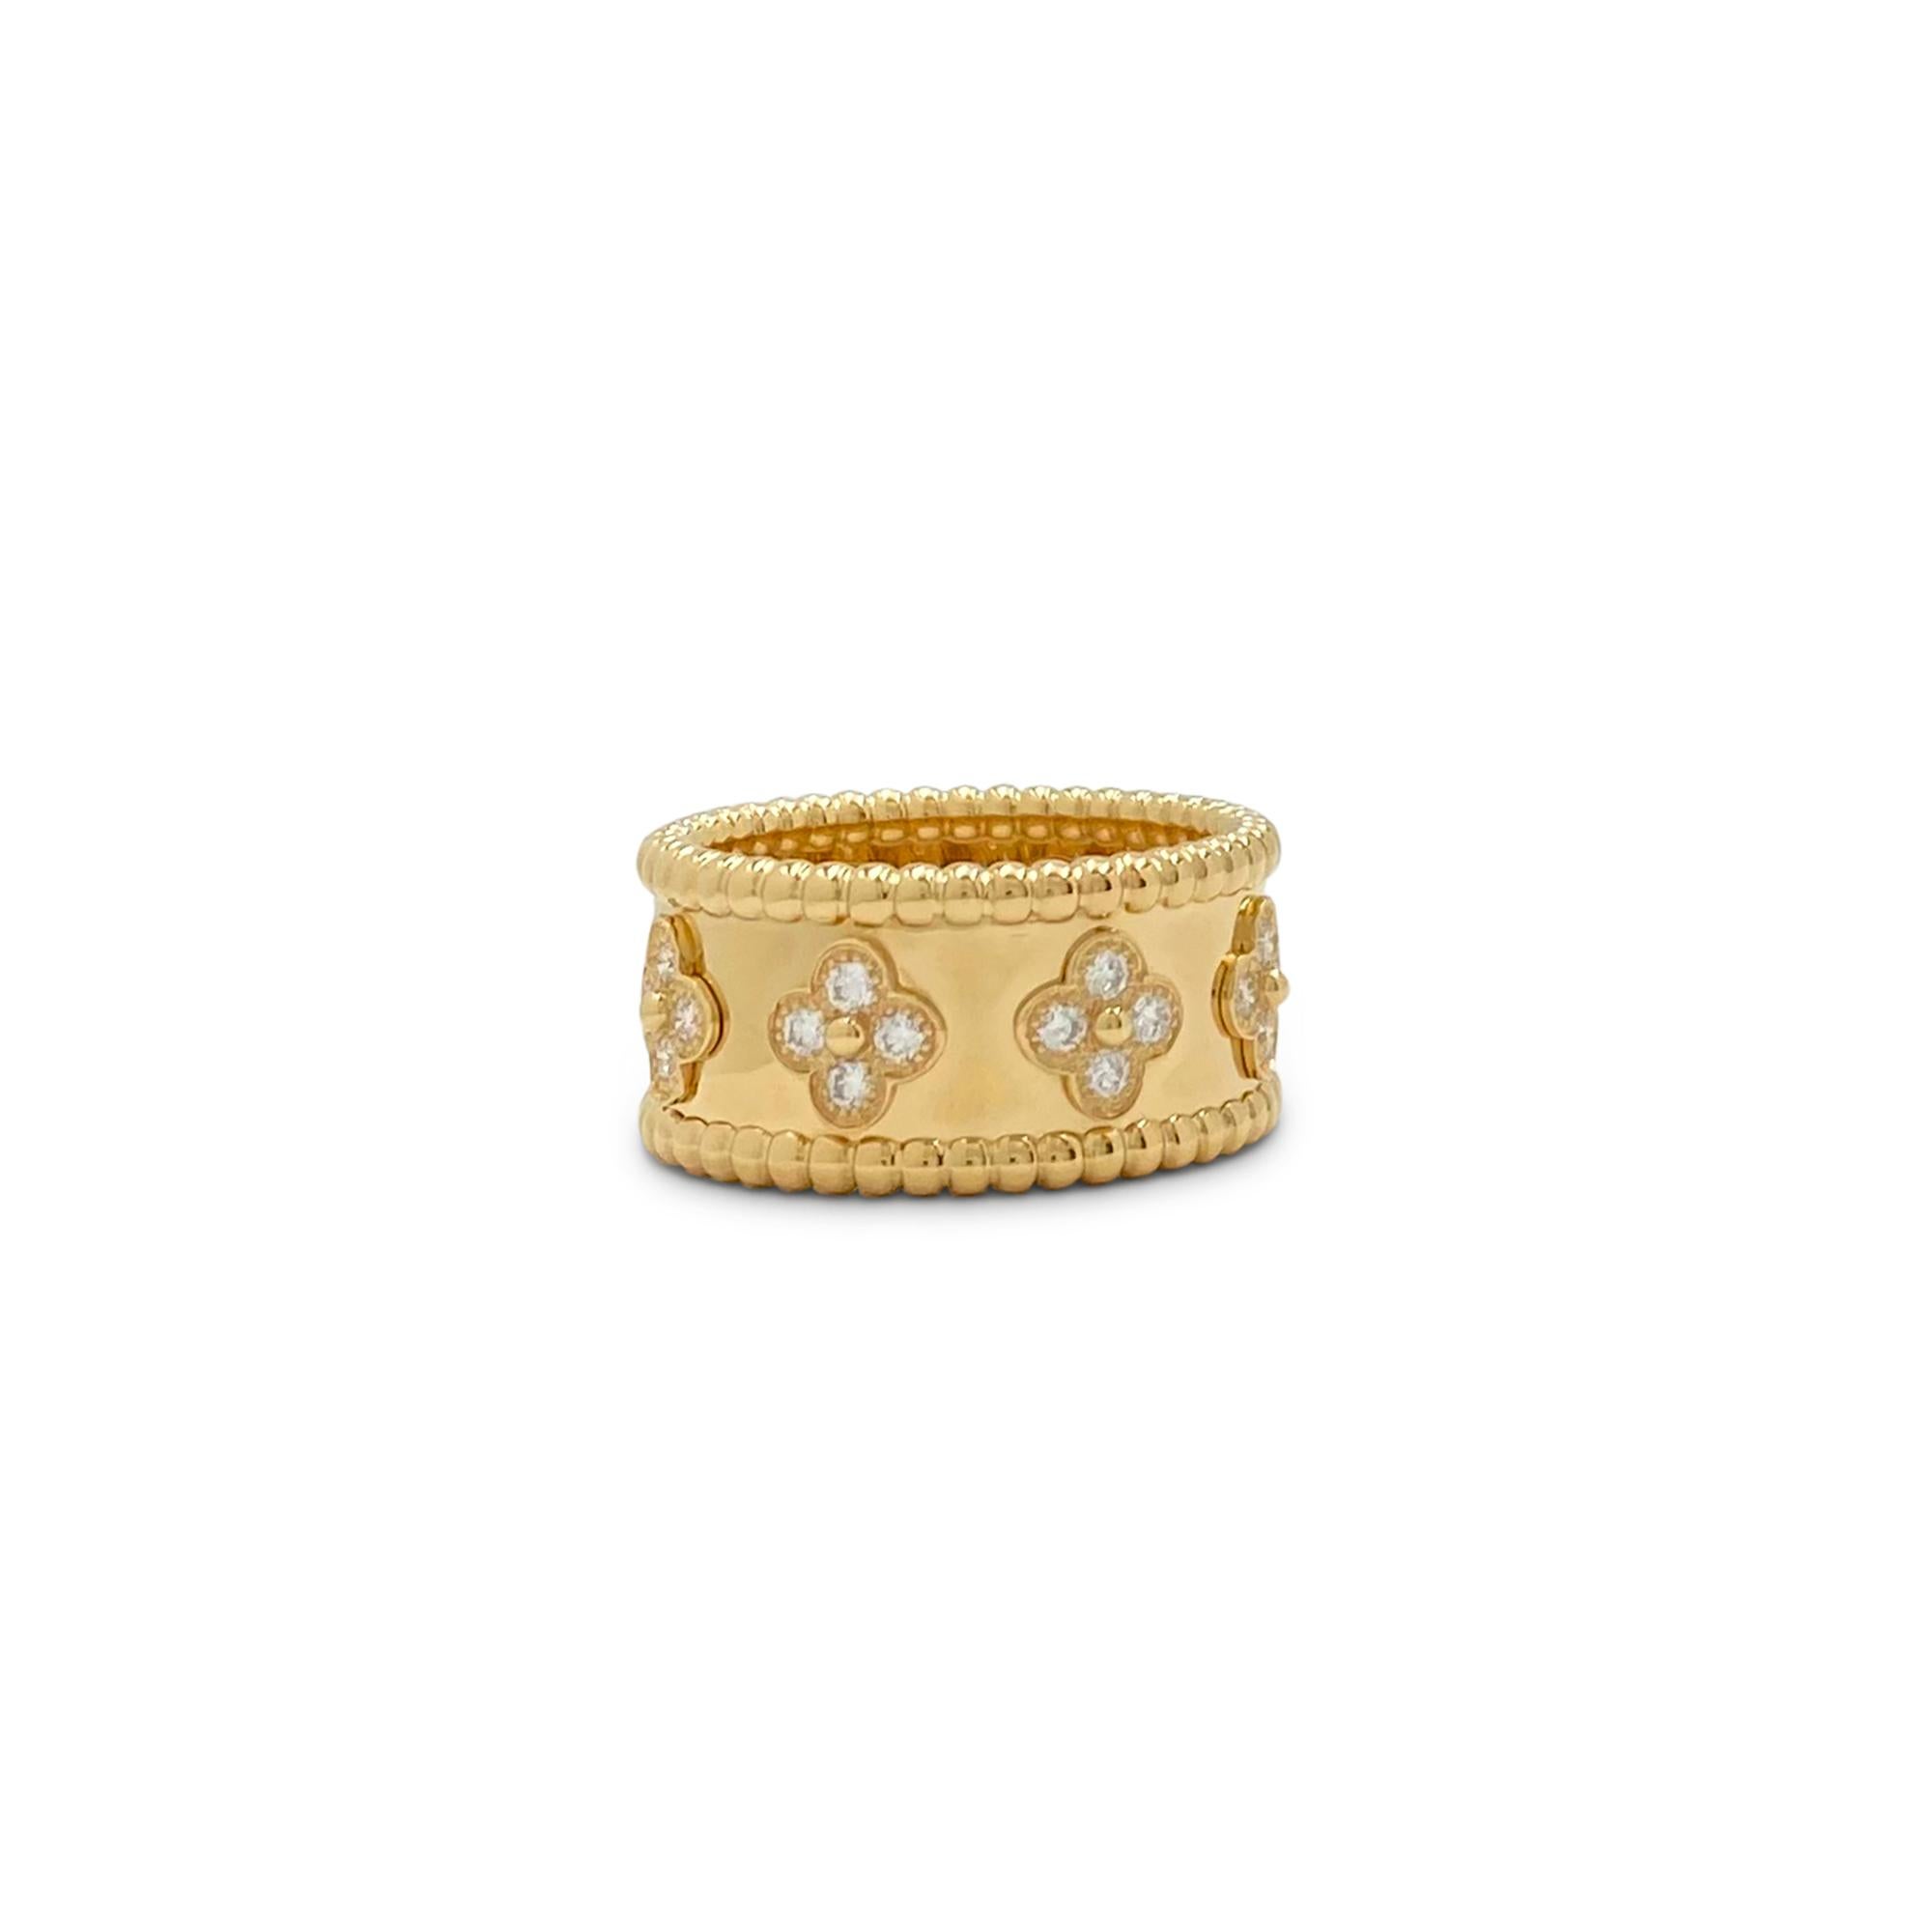 Authentic Van Cleef & Arpels Perlée Clovers ring crafted in 18 karat yellow gold.  Adorned with clover motifs that are set with an estimated .71 carats of high quality (E-F color, VS clarity) round brilliant cut diamonds.  Size 56, US 7.5. Signed